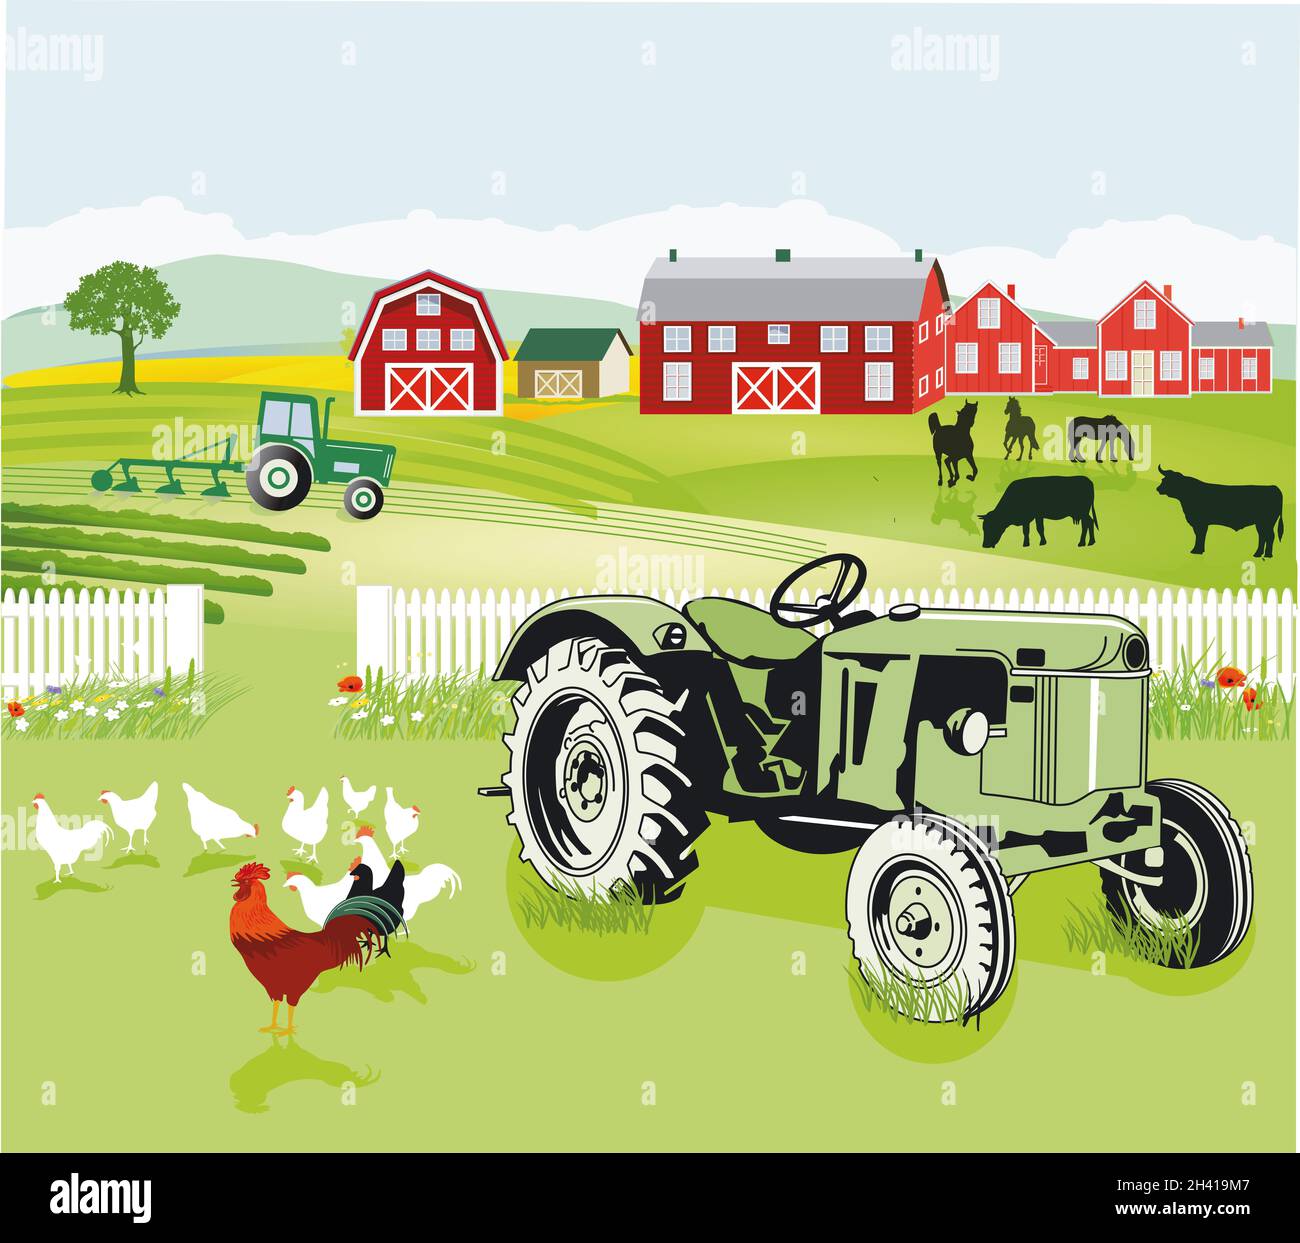 Friendly farming with poultry, farmhouse and tractor Stock Photo